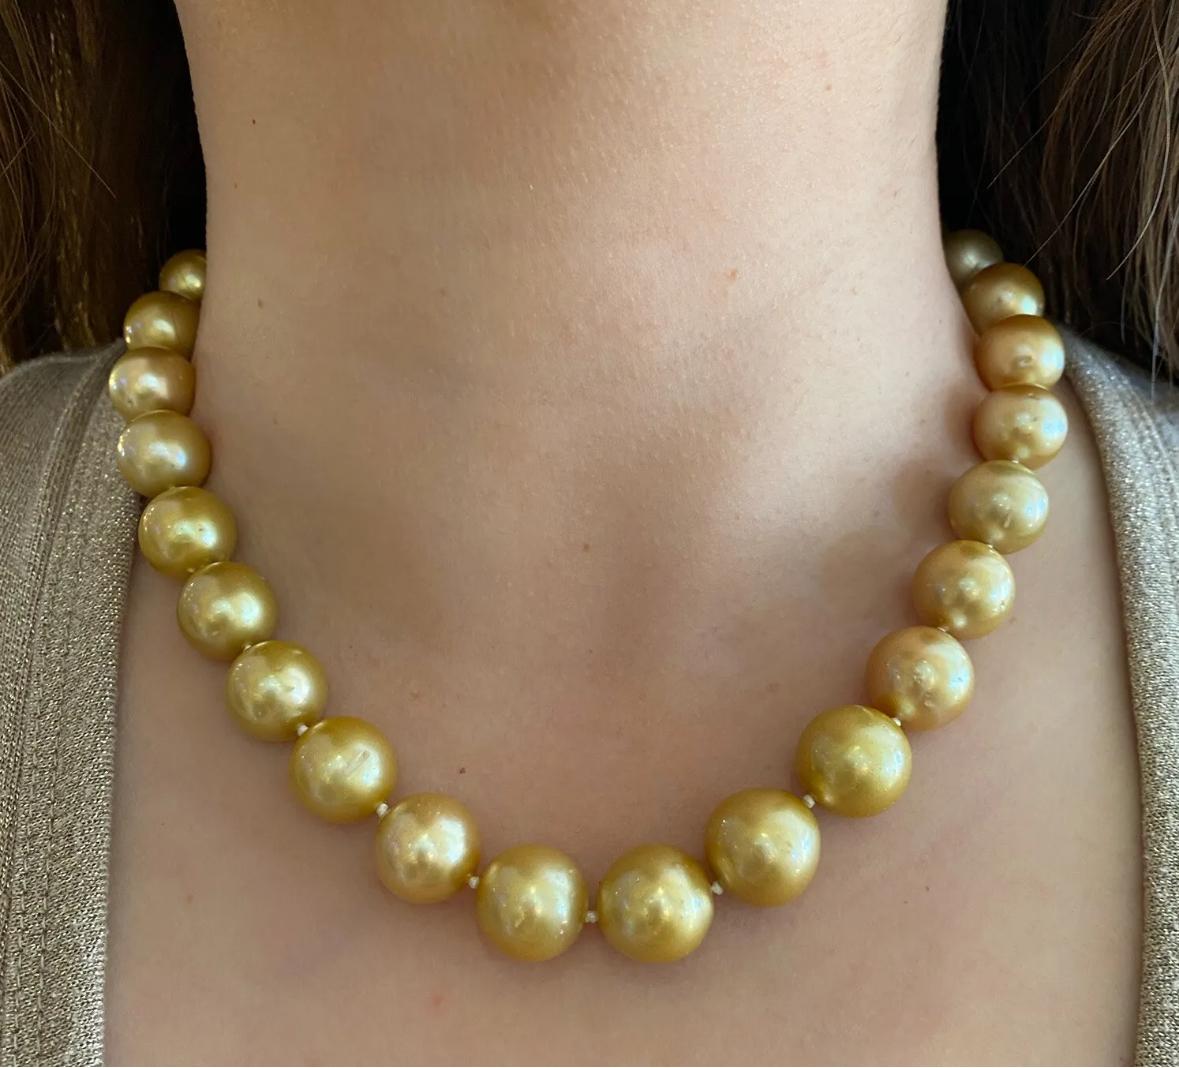 Golden South Sea Pearls with Pave Diamond Clasp Necklace 18k Yellow Gold In Excellent Condition For Sale In La Jolla, CA